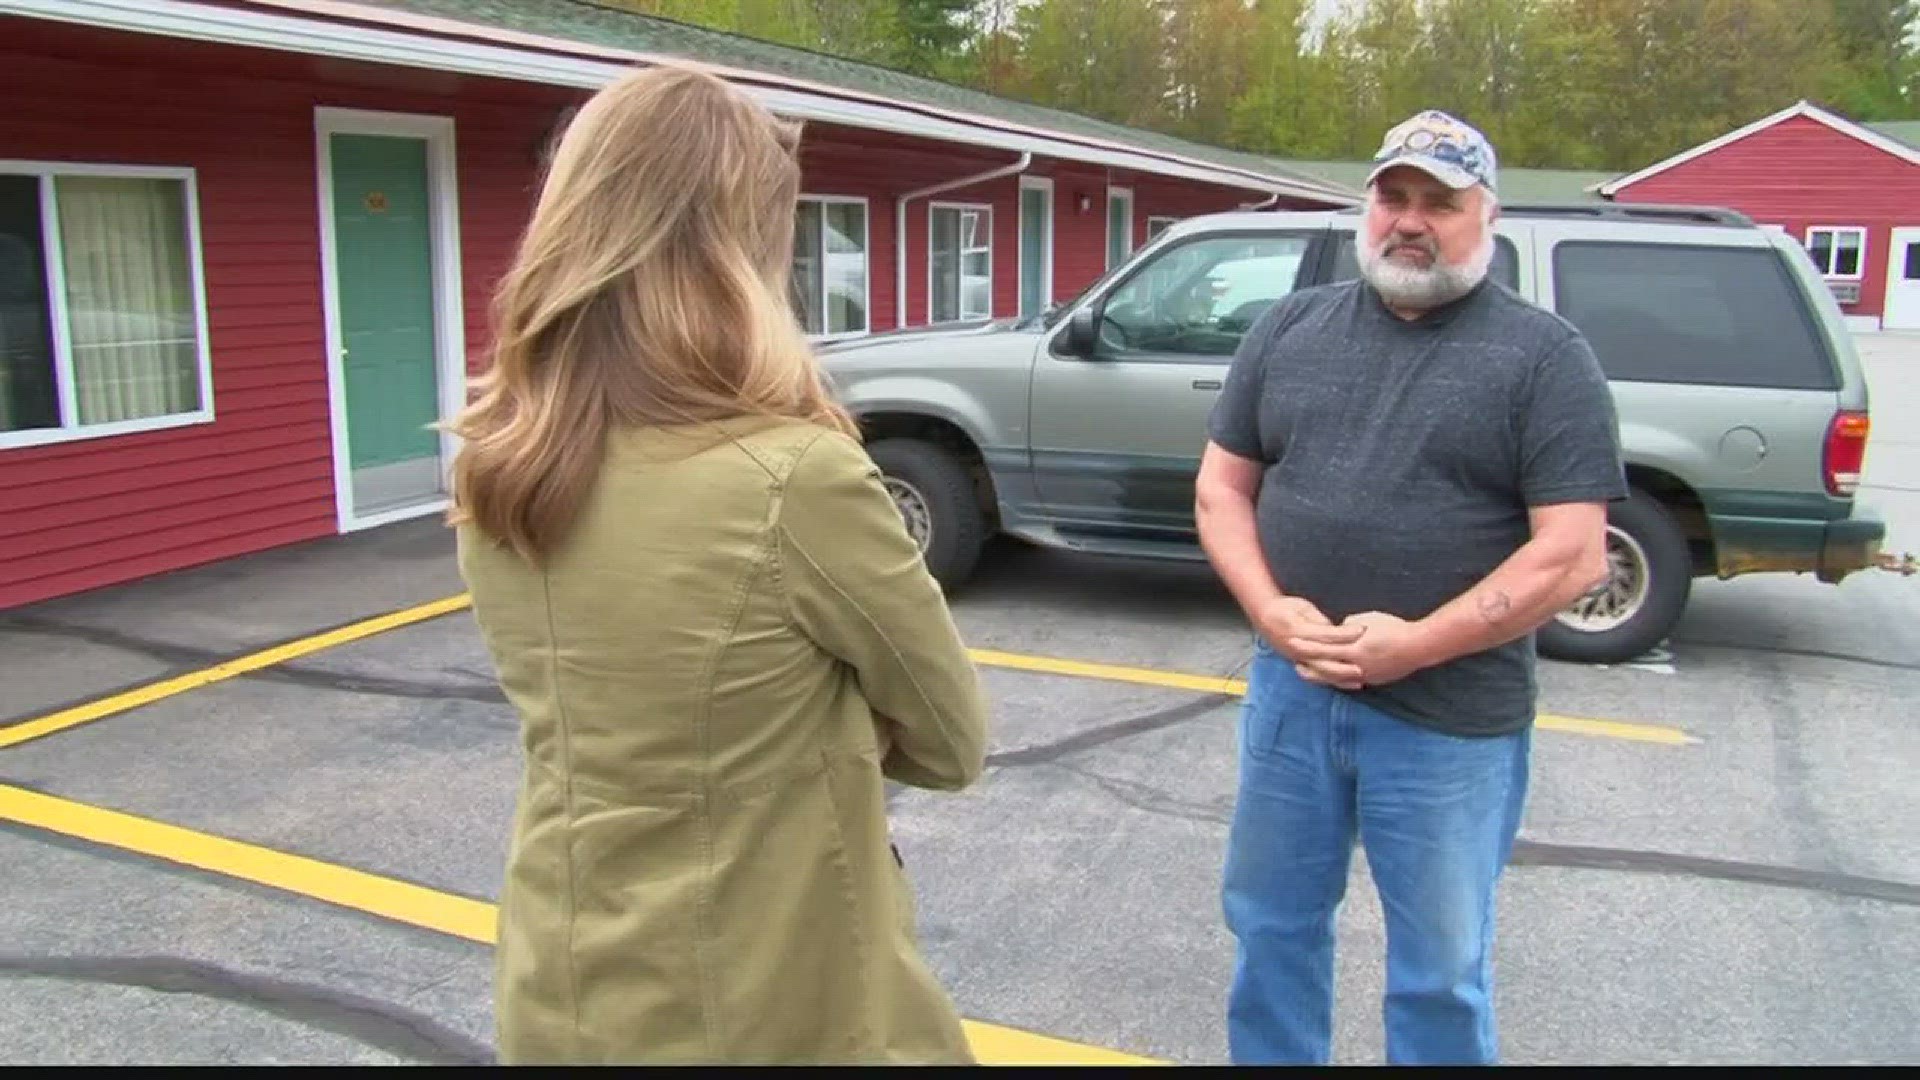 Man moving to Maine asks for help after losing $20K.